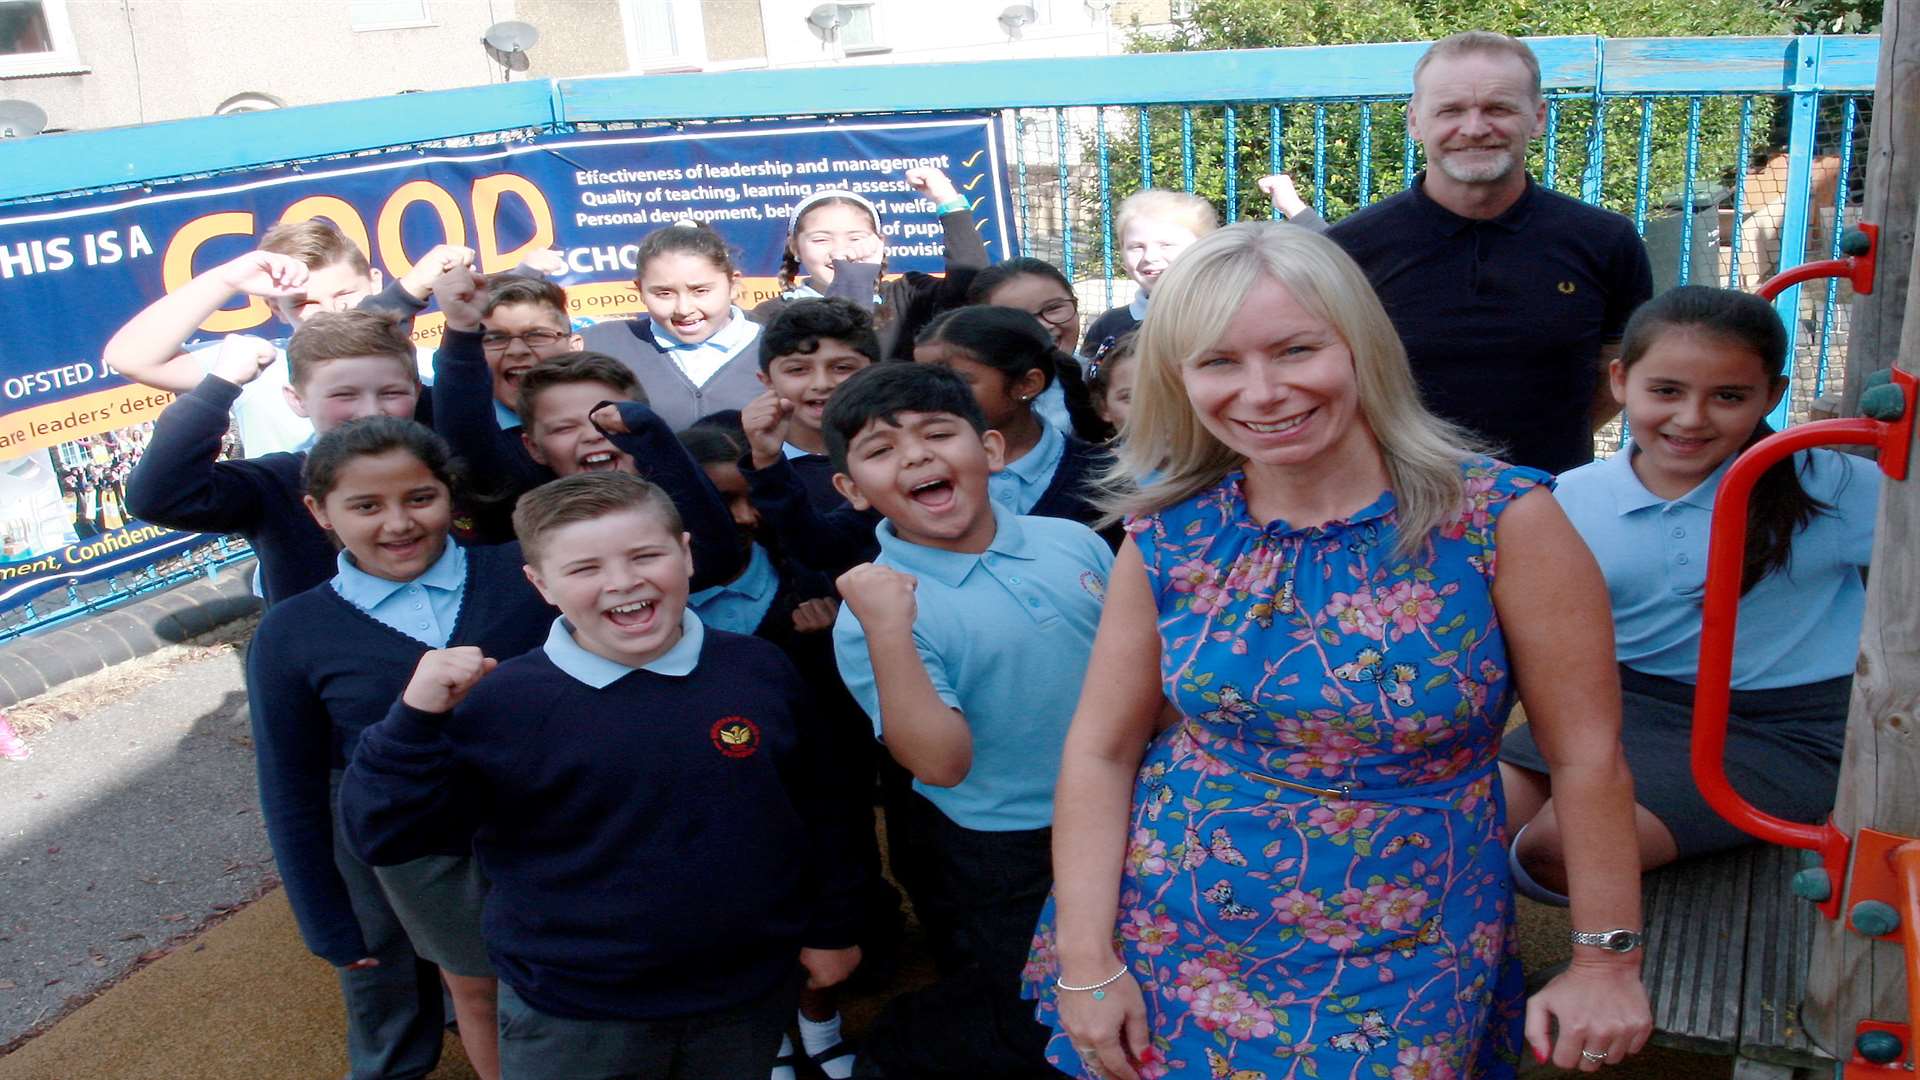 Wrotham Road Primary School Headteacher Sarah Green and Deputy Head Andy Bennett with pupils celebrating the schools good Ofsted report